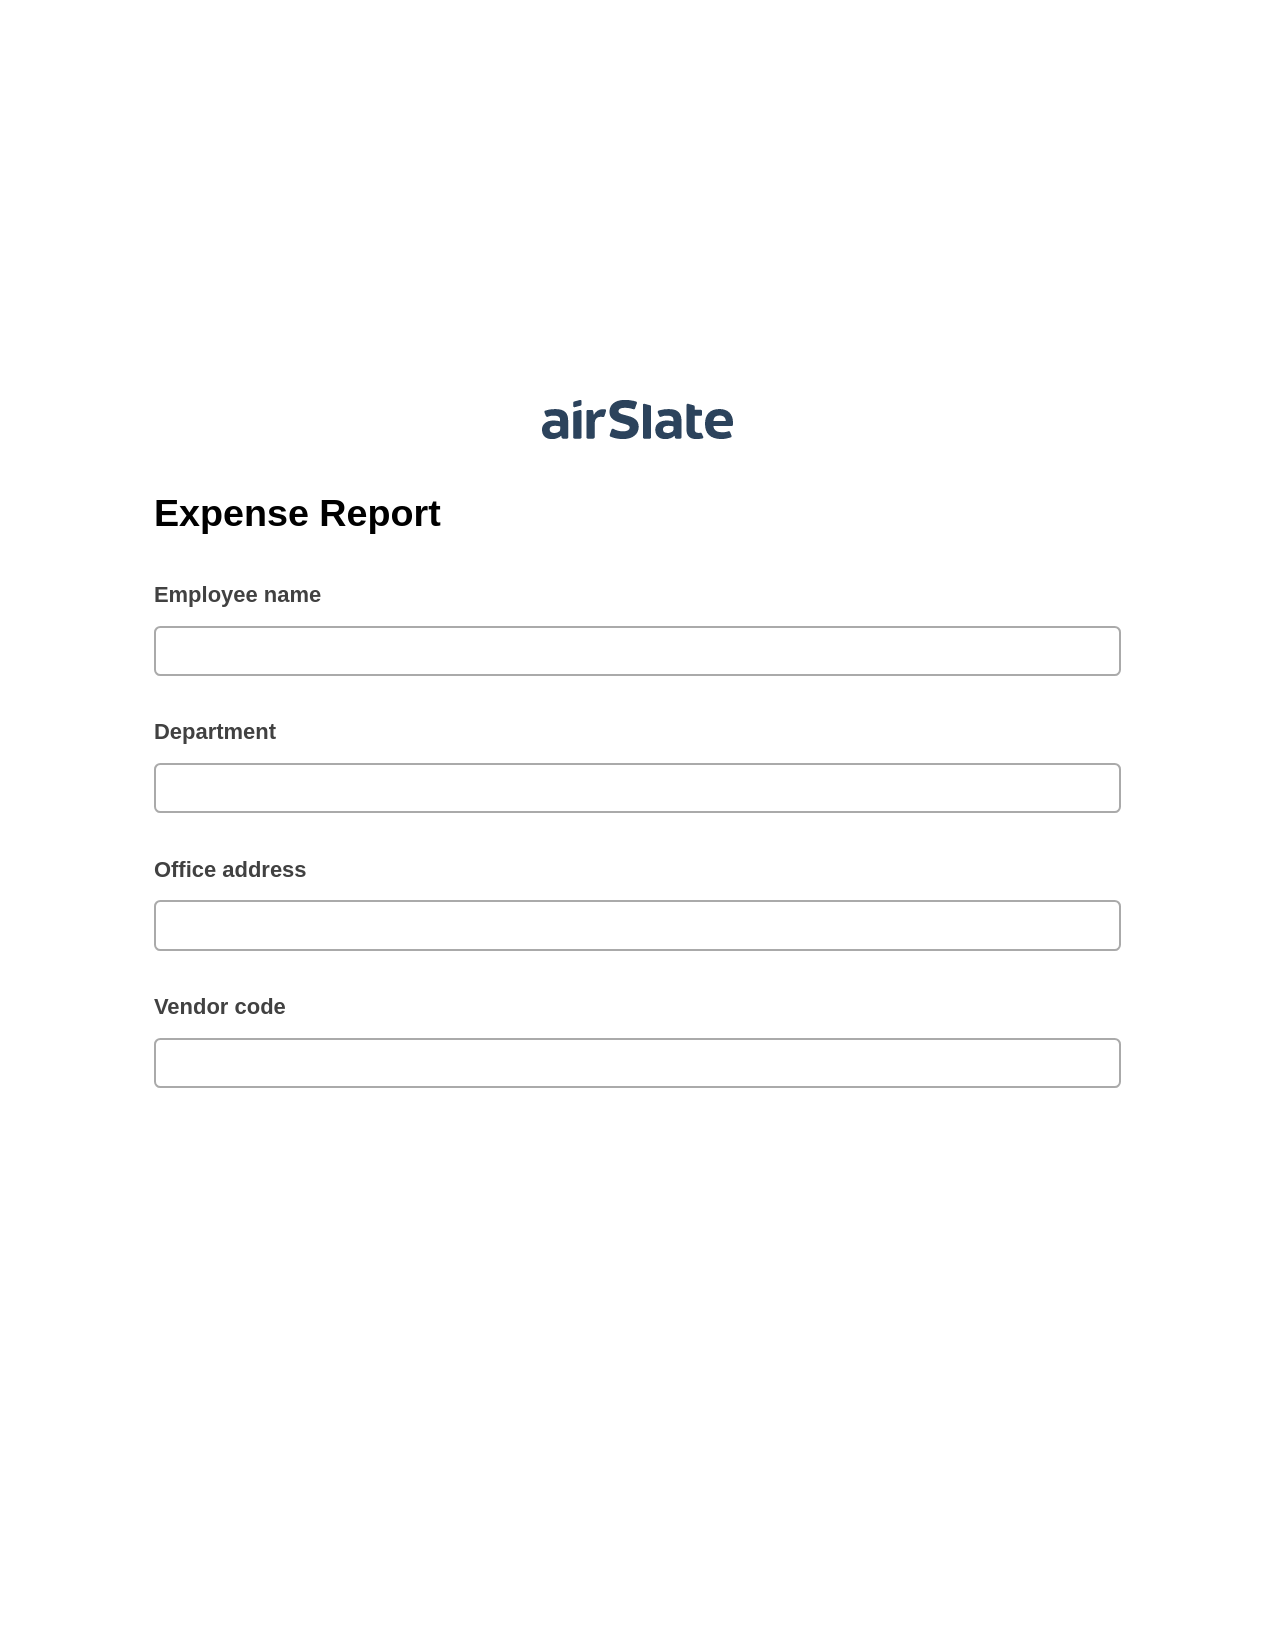 Expense Report Pre-fill Slate from MS Dynamics 365 Records Bot, Reminder Bot, Export to Formstack Documents Bot